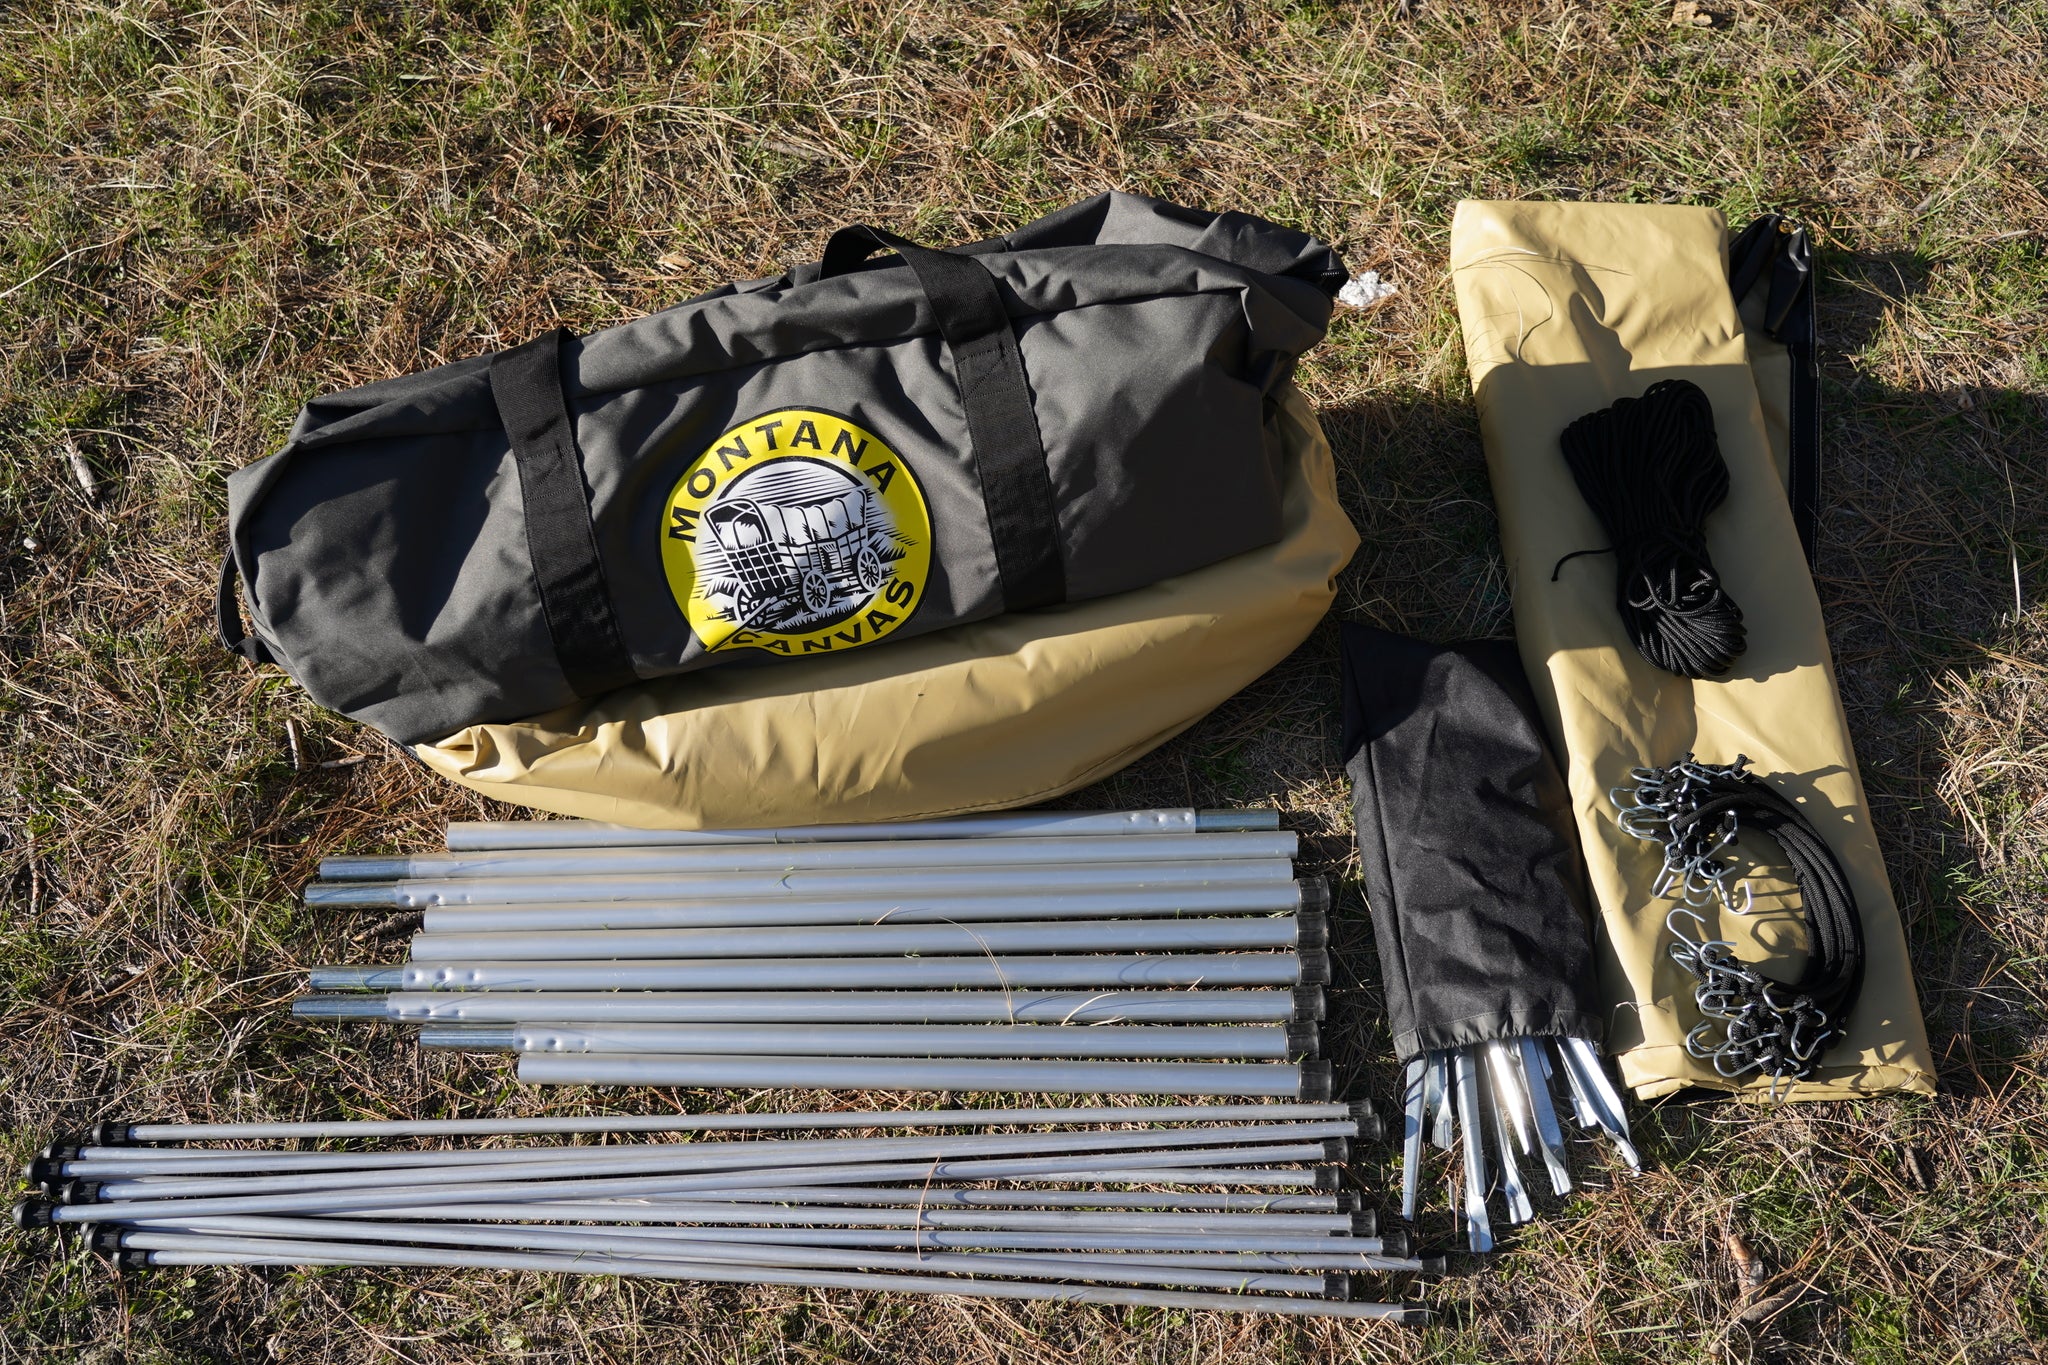 Montana Canvas Spike Tent Components on Ground to show volume of products